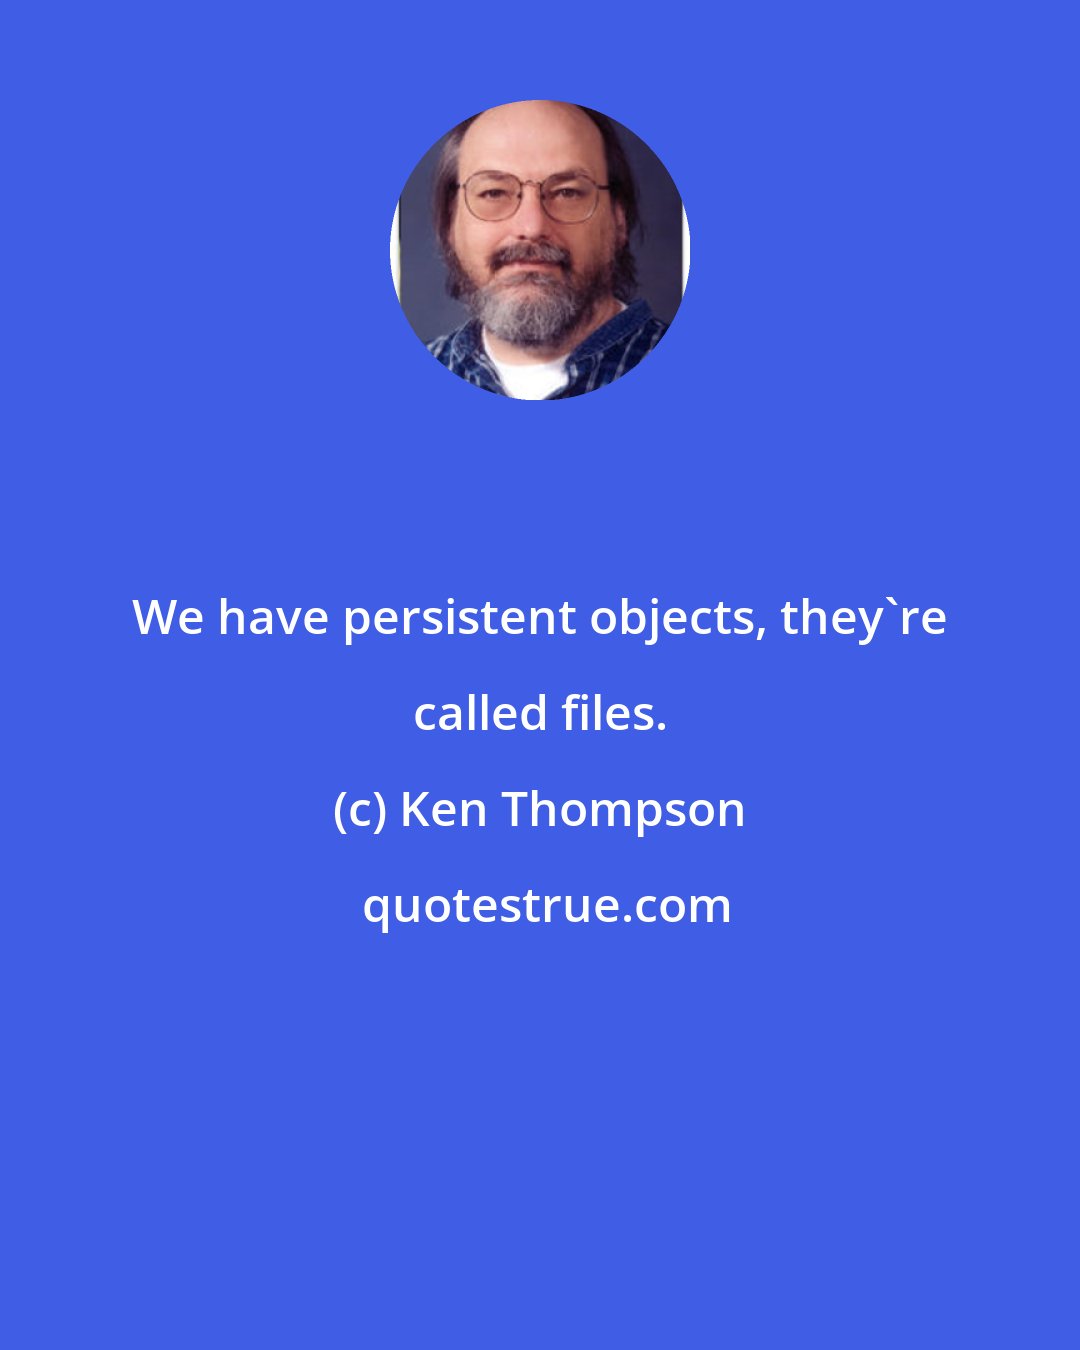 Ken Thompson: We have persistent objects, they're called files.